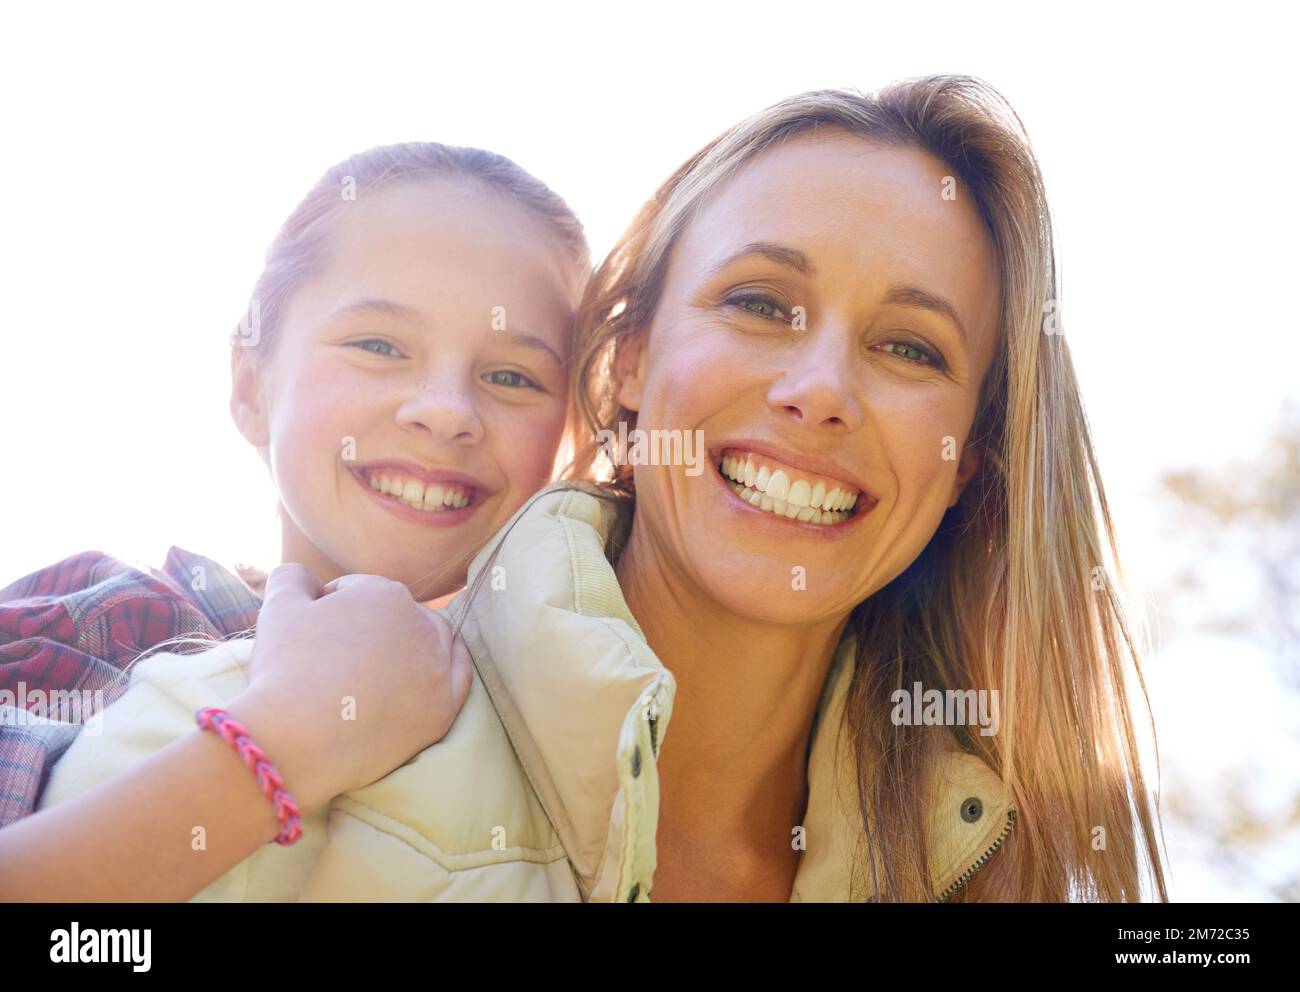 Enjoy everyday moments. A happy mother and daughter spending time together outdoors. Stock Photo